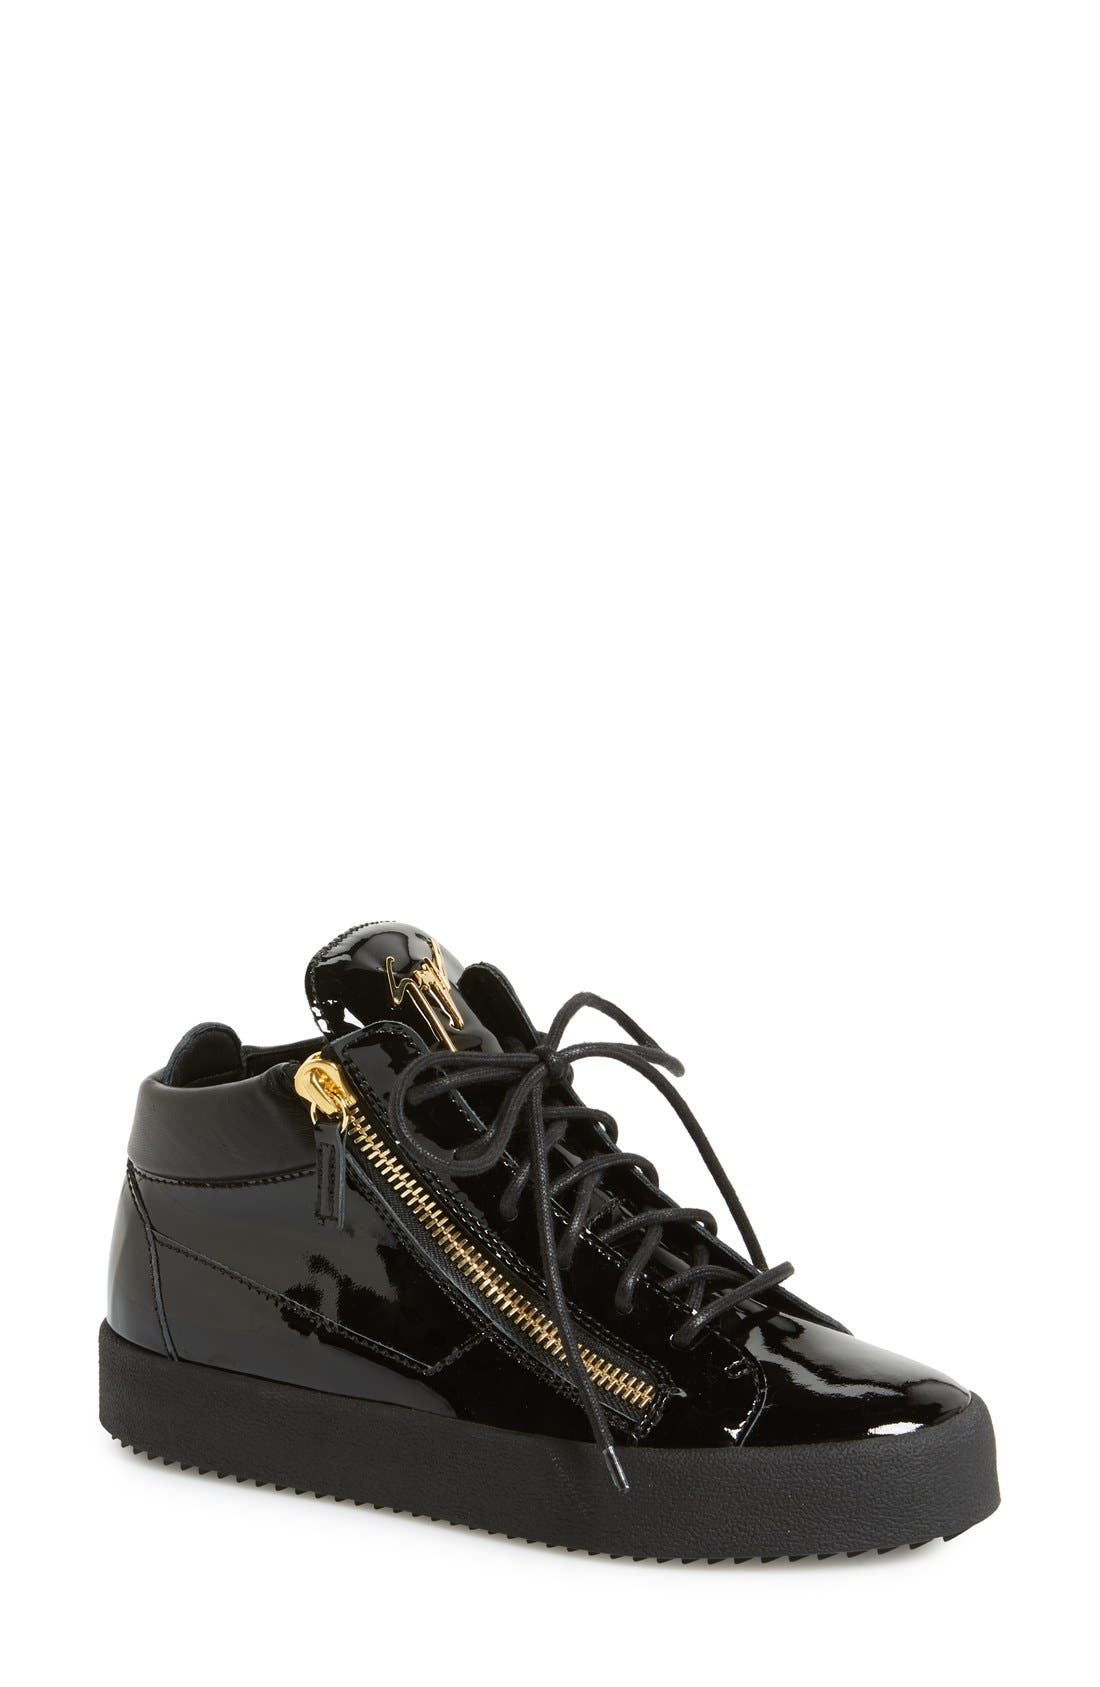 Top Patent Leather Sneaker (Women 